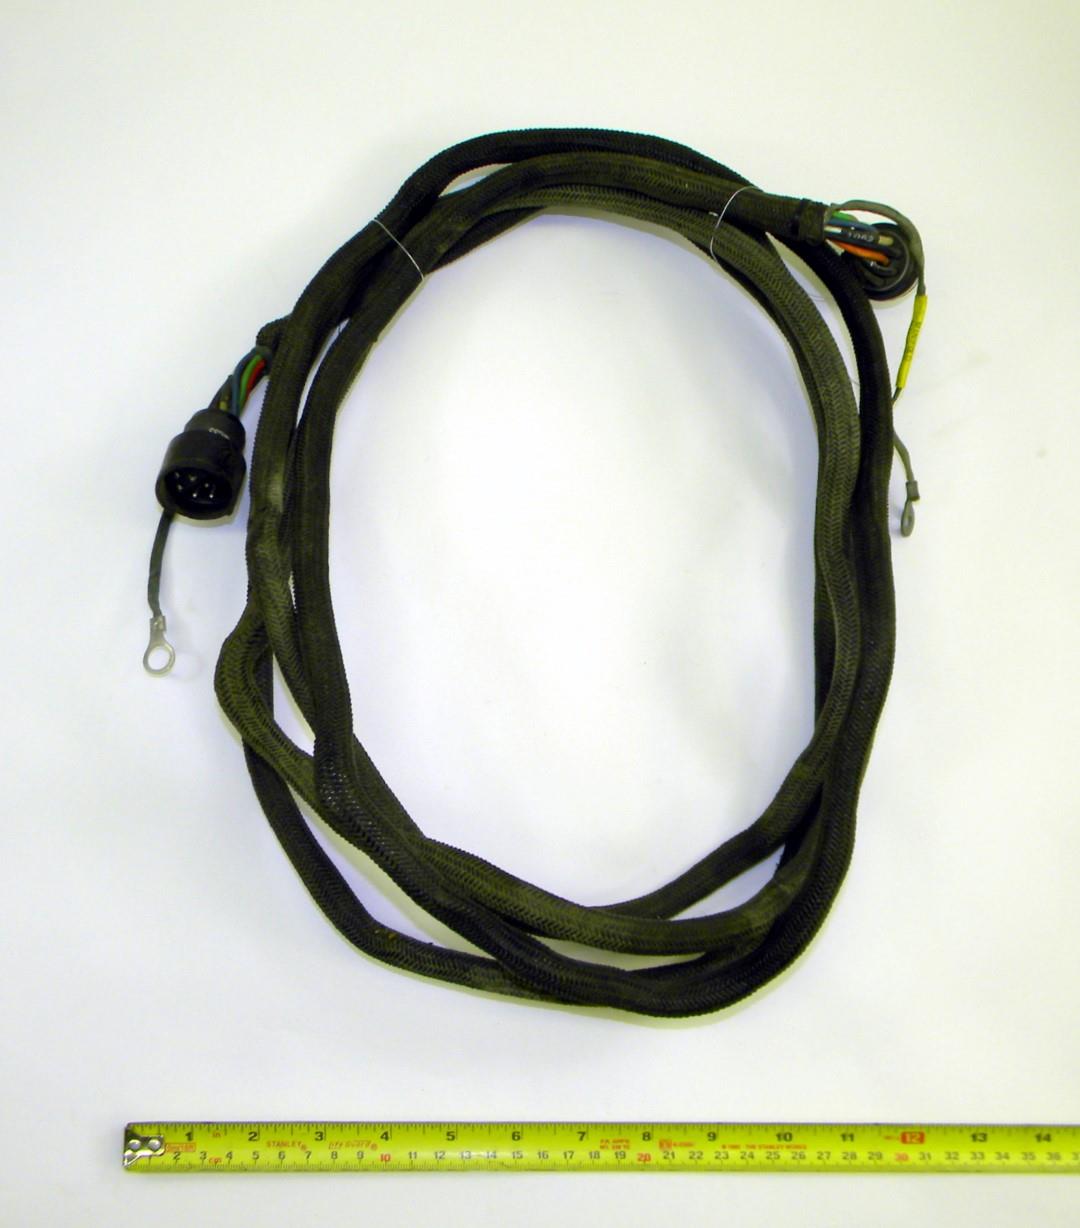 MA3-670 | 6150-01-418-7691 CTIS Manifold to Controller Wiring Harness for M35A3 Series USED  (2).JPG